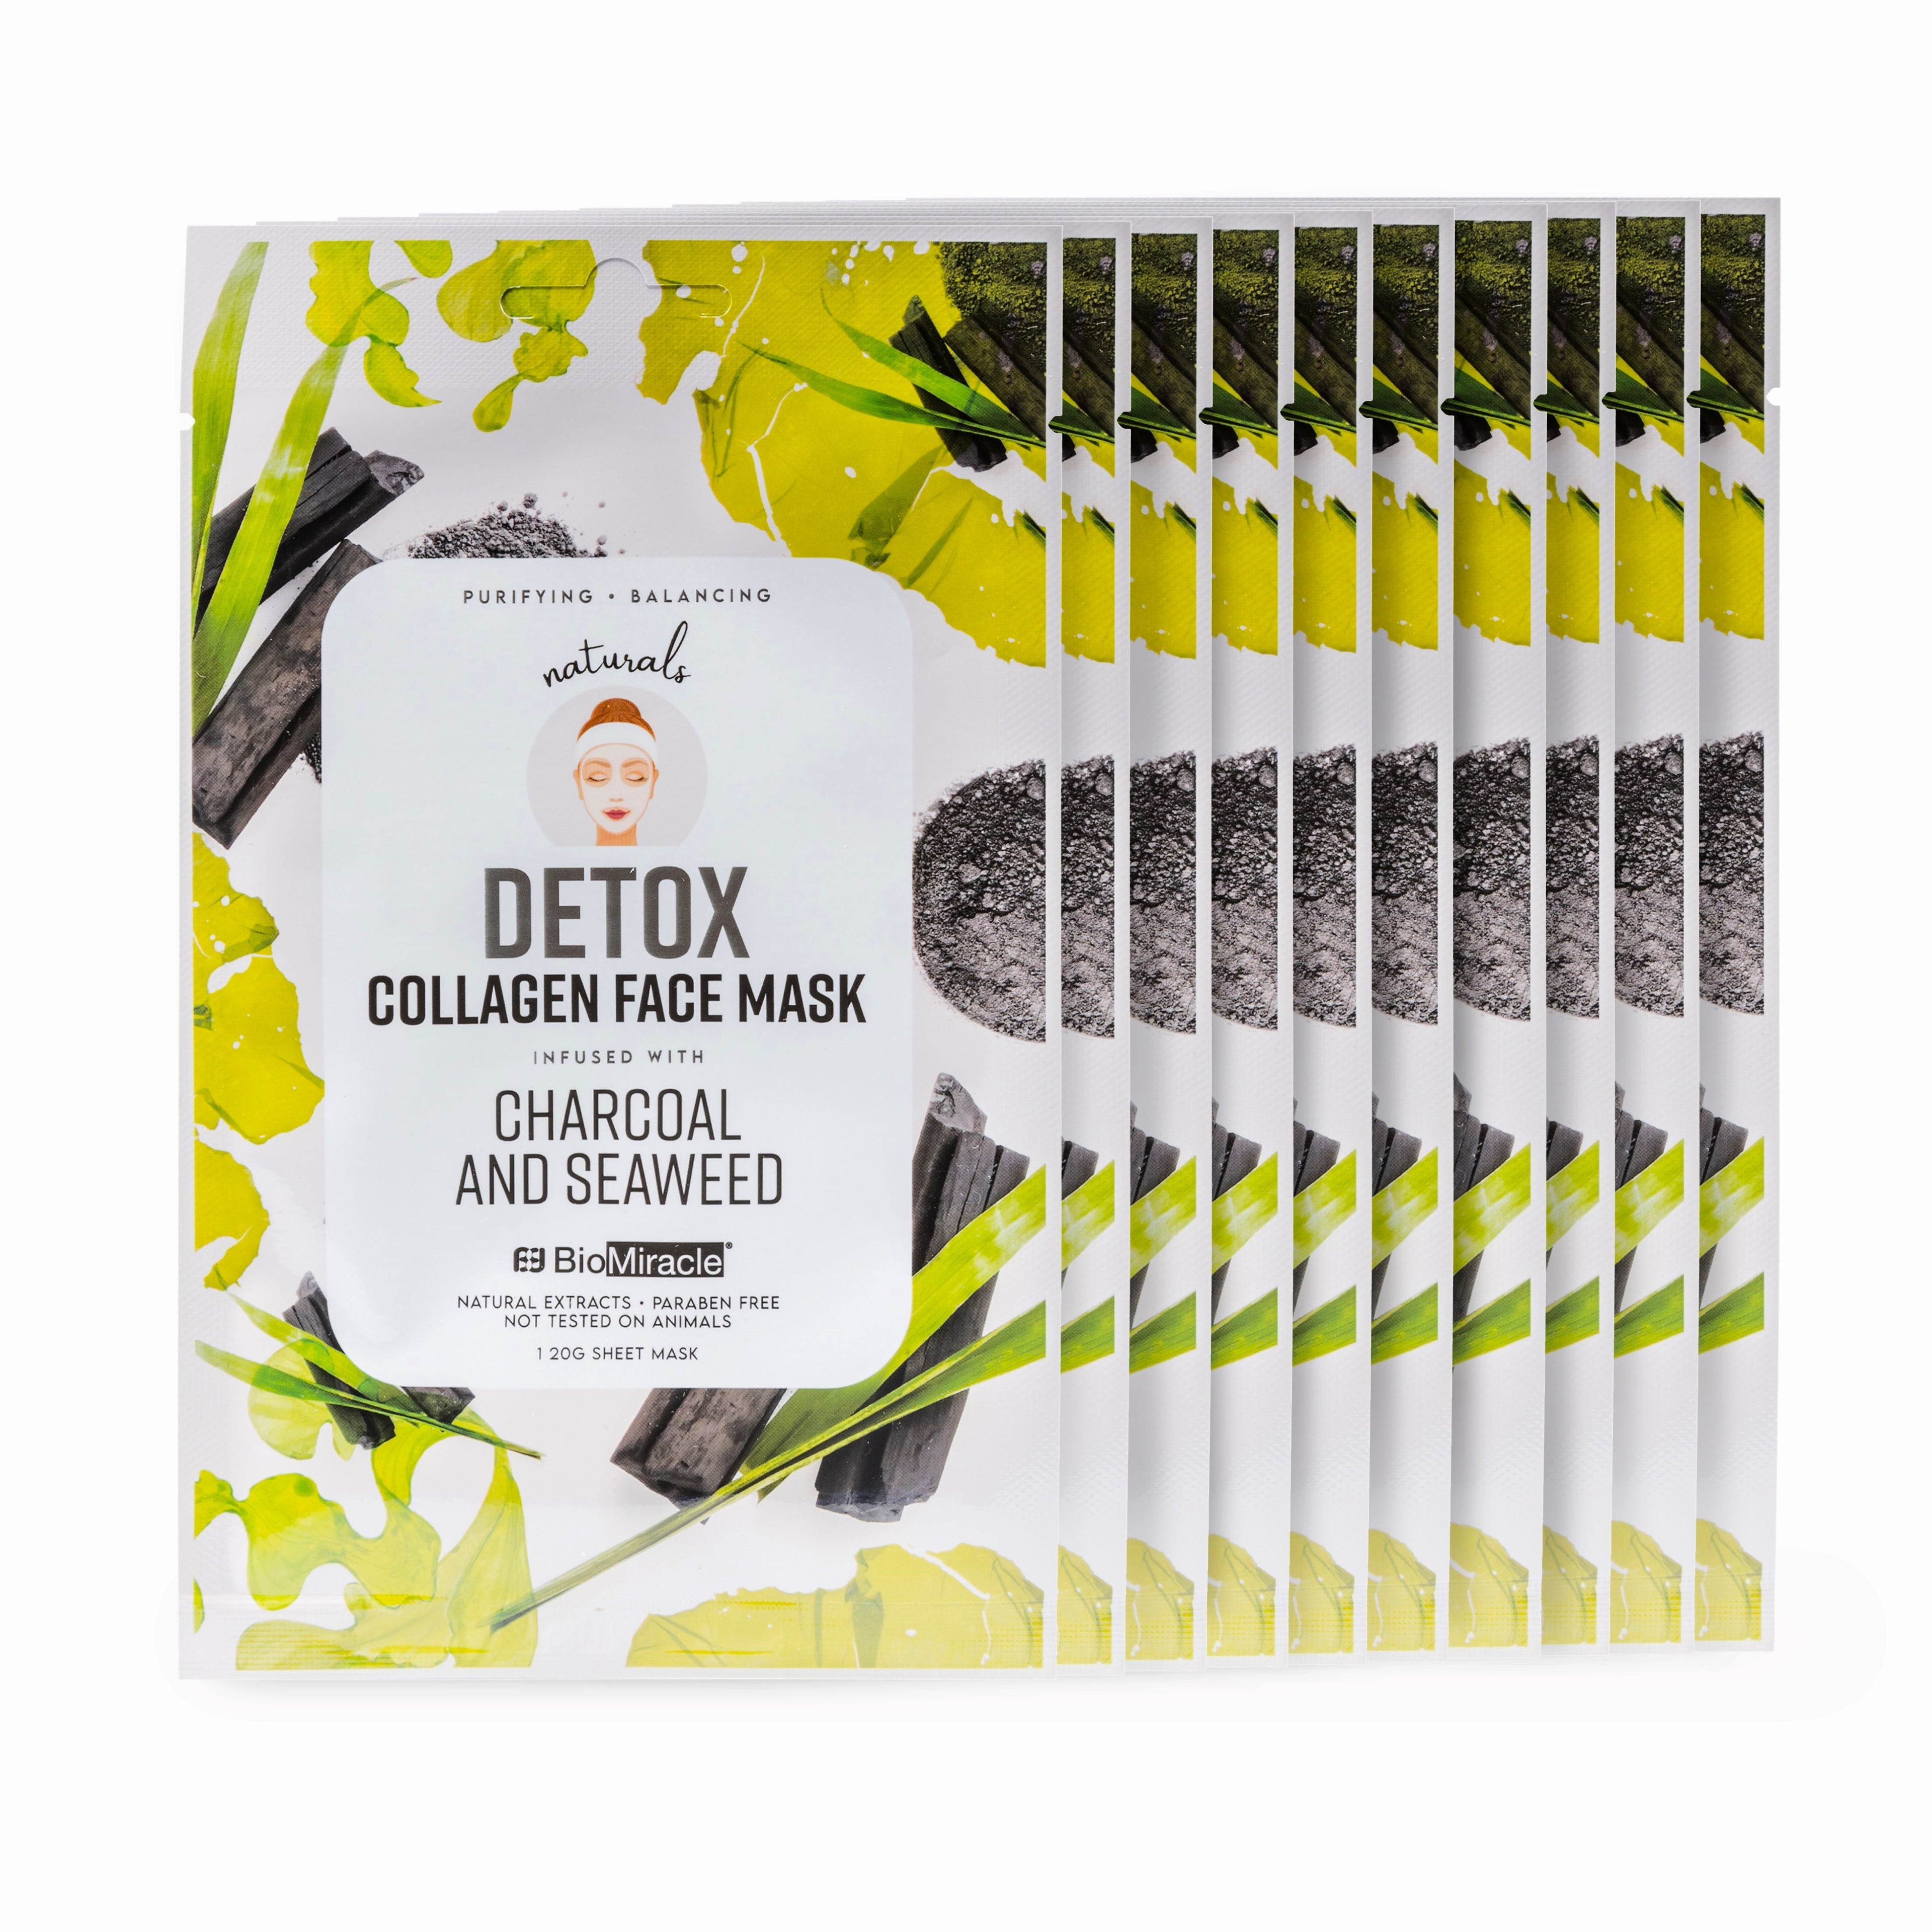 Detox Collagen Face Mask Infused with Charcoal and Seaweed 10 Pack